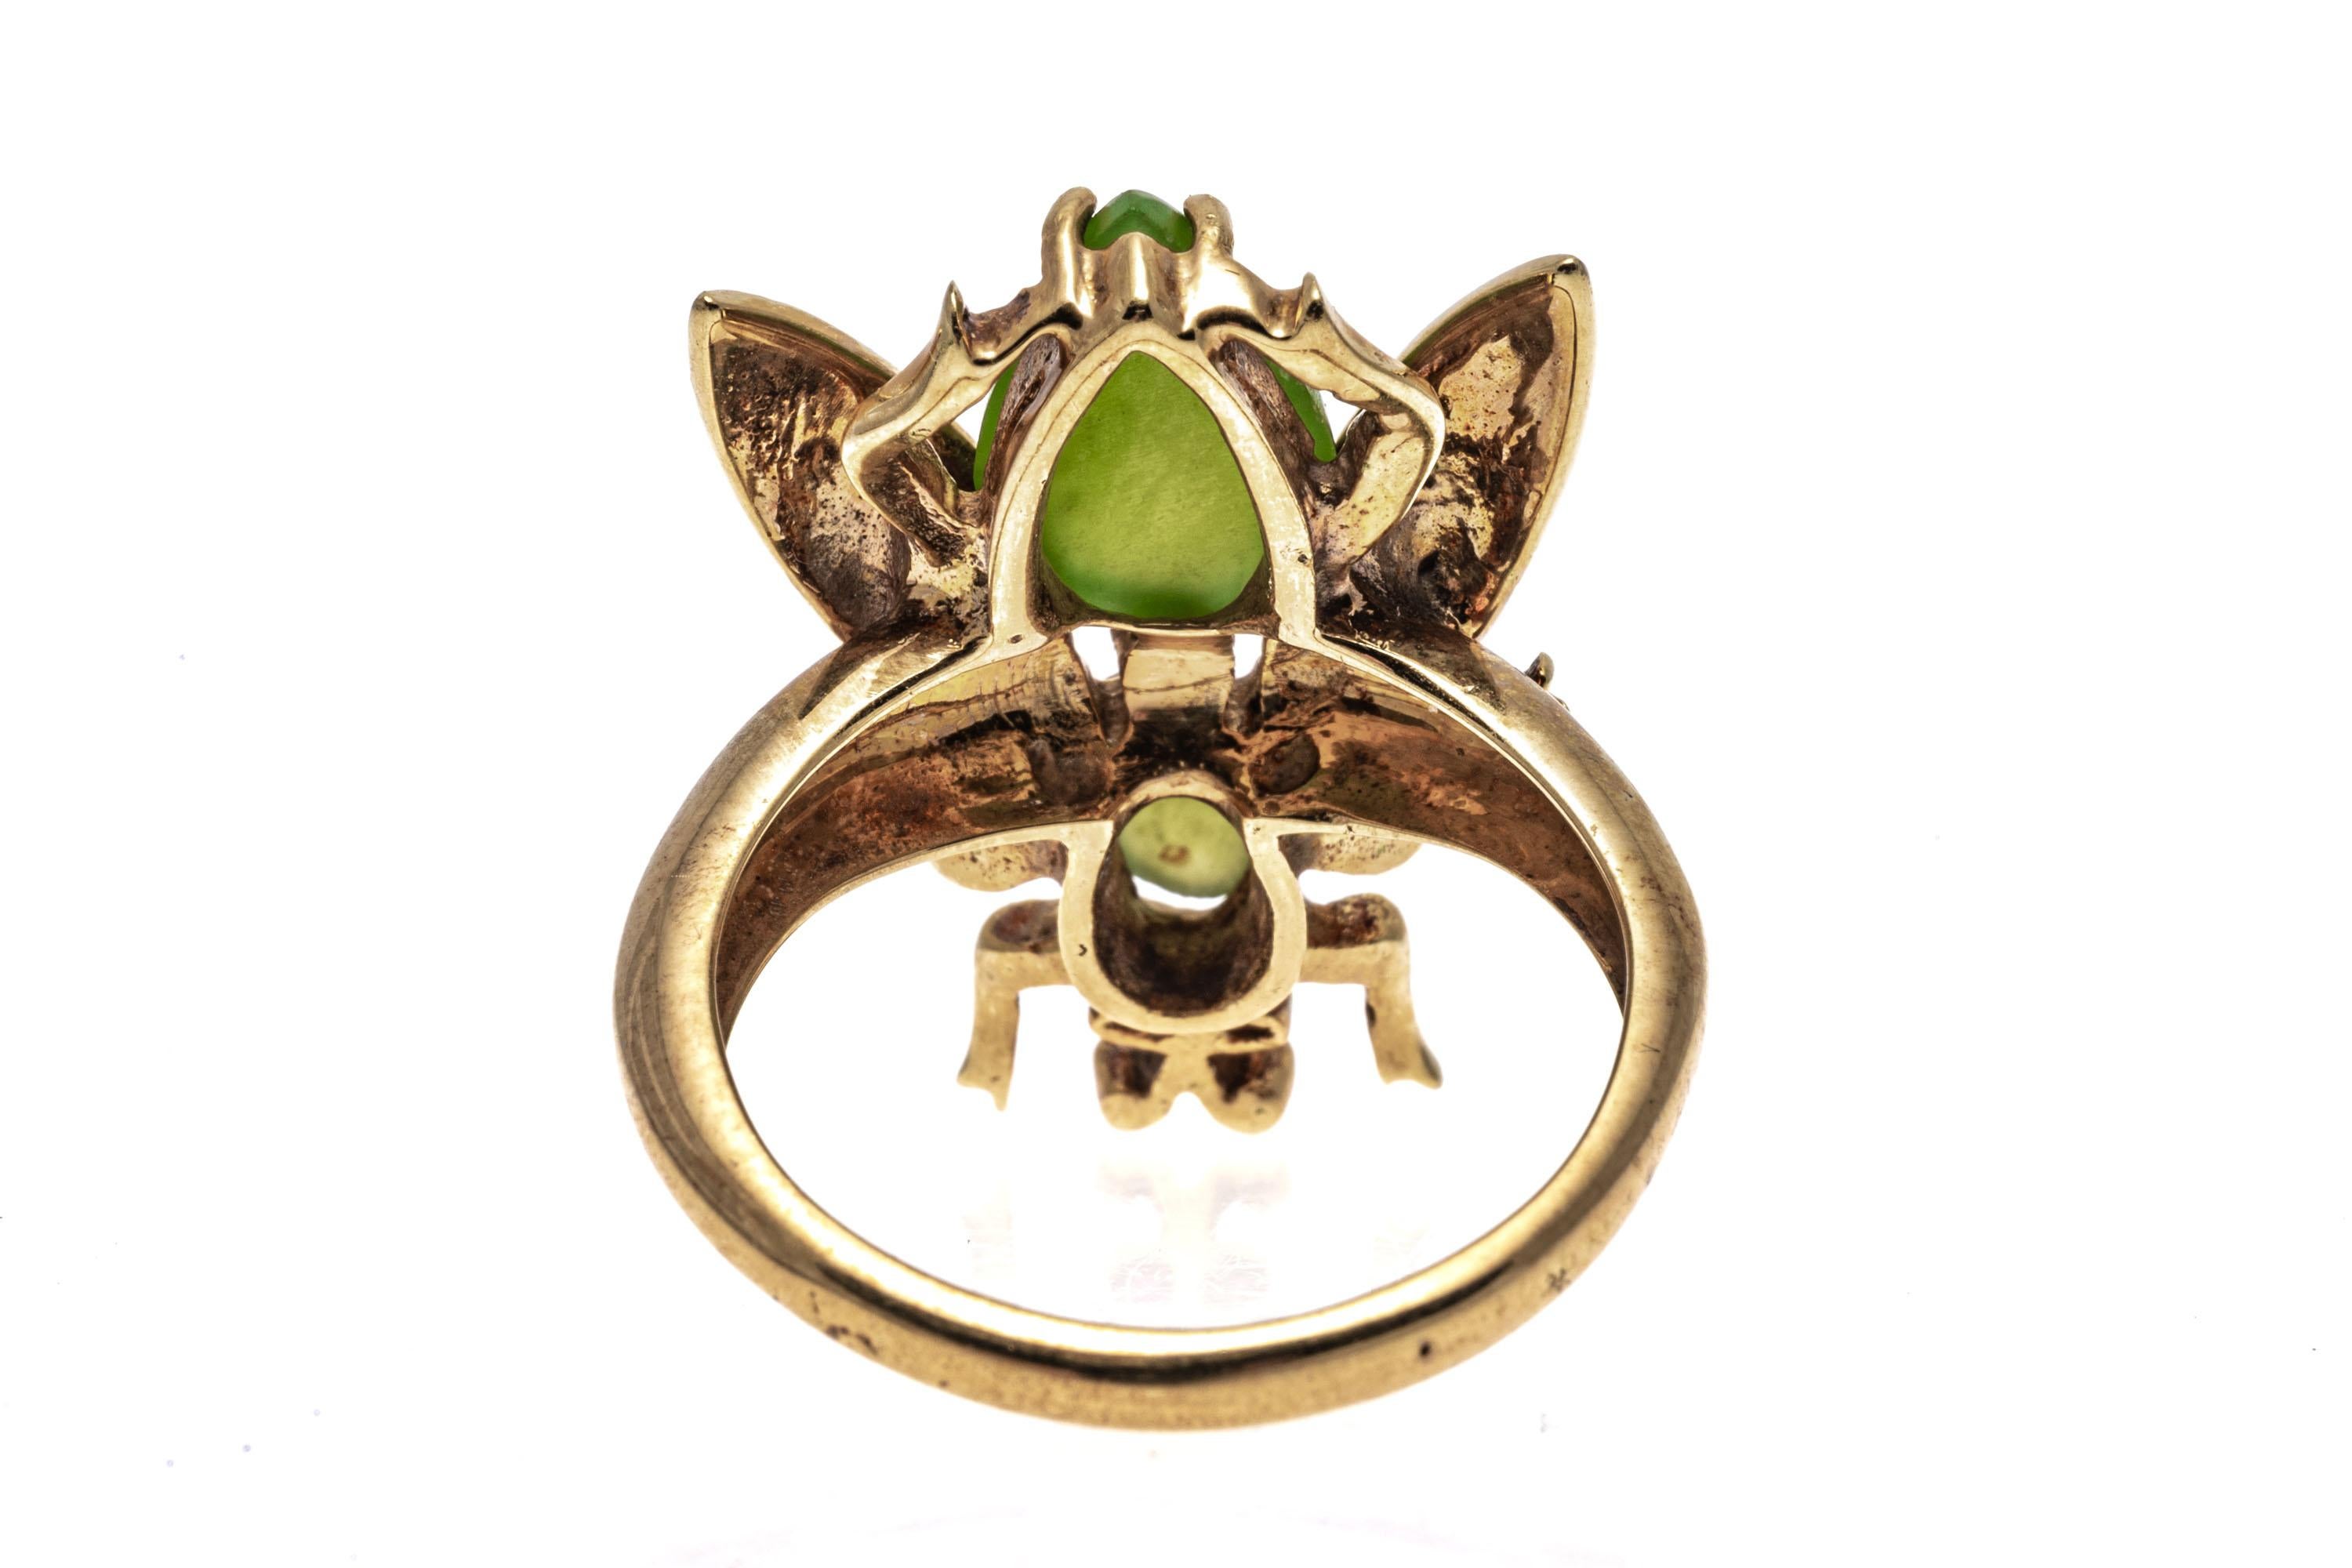 14k Yellow Gold Nephrite Jade And Ombre Enamel Bug Ring.
This striking ring is a bug motif, set with two pale green nephrite jade cabachons, one oval and one pear shaped, decorated with cobalt, turquoise and jade color ombre enamel wings. The bug is